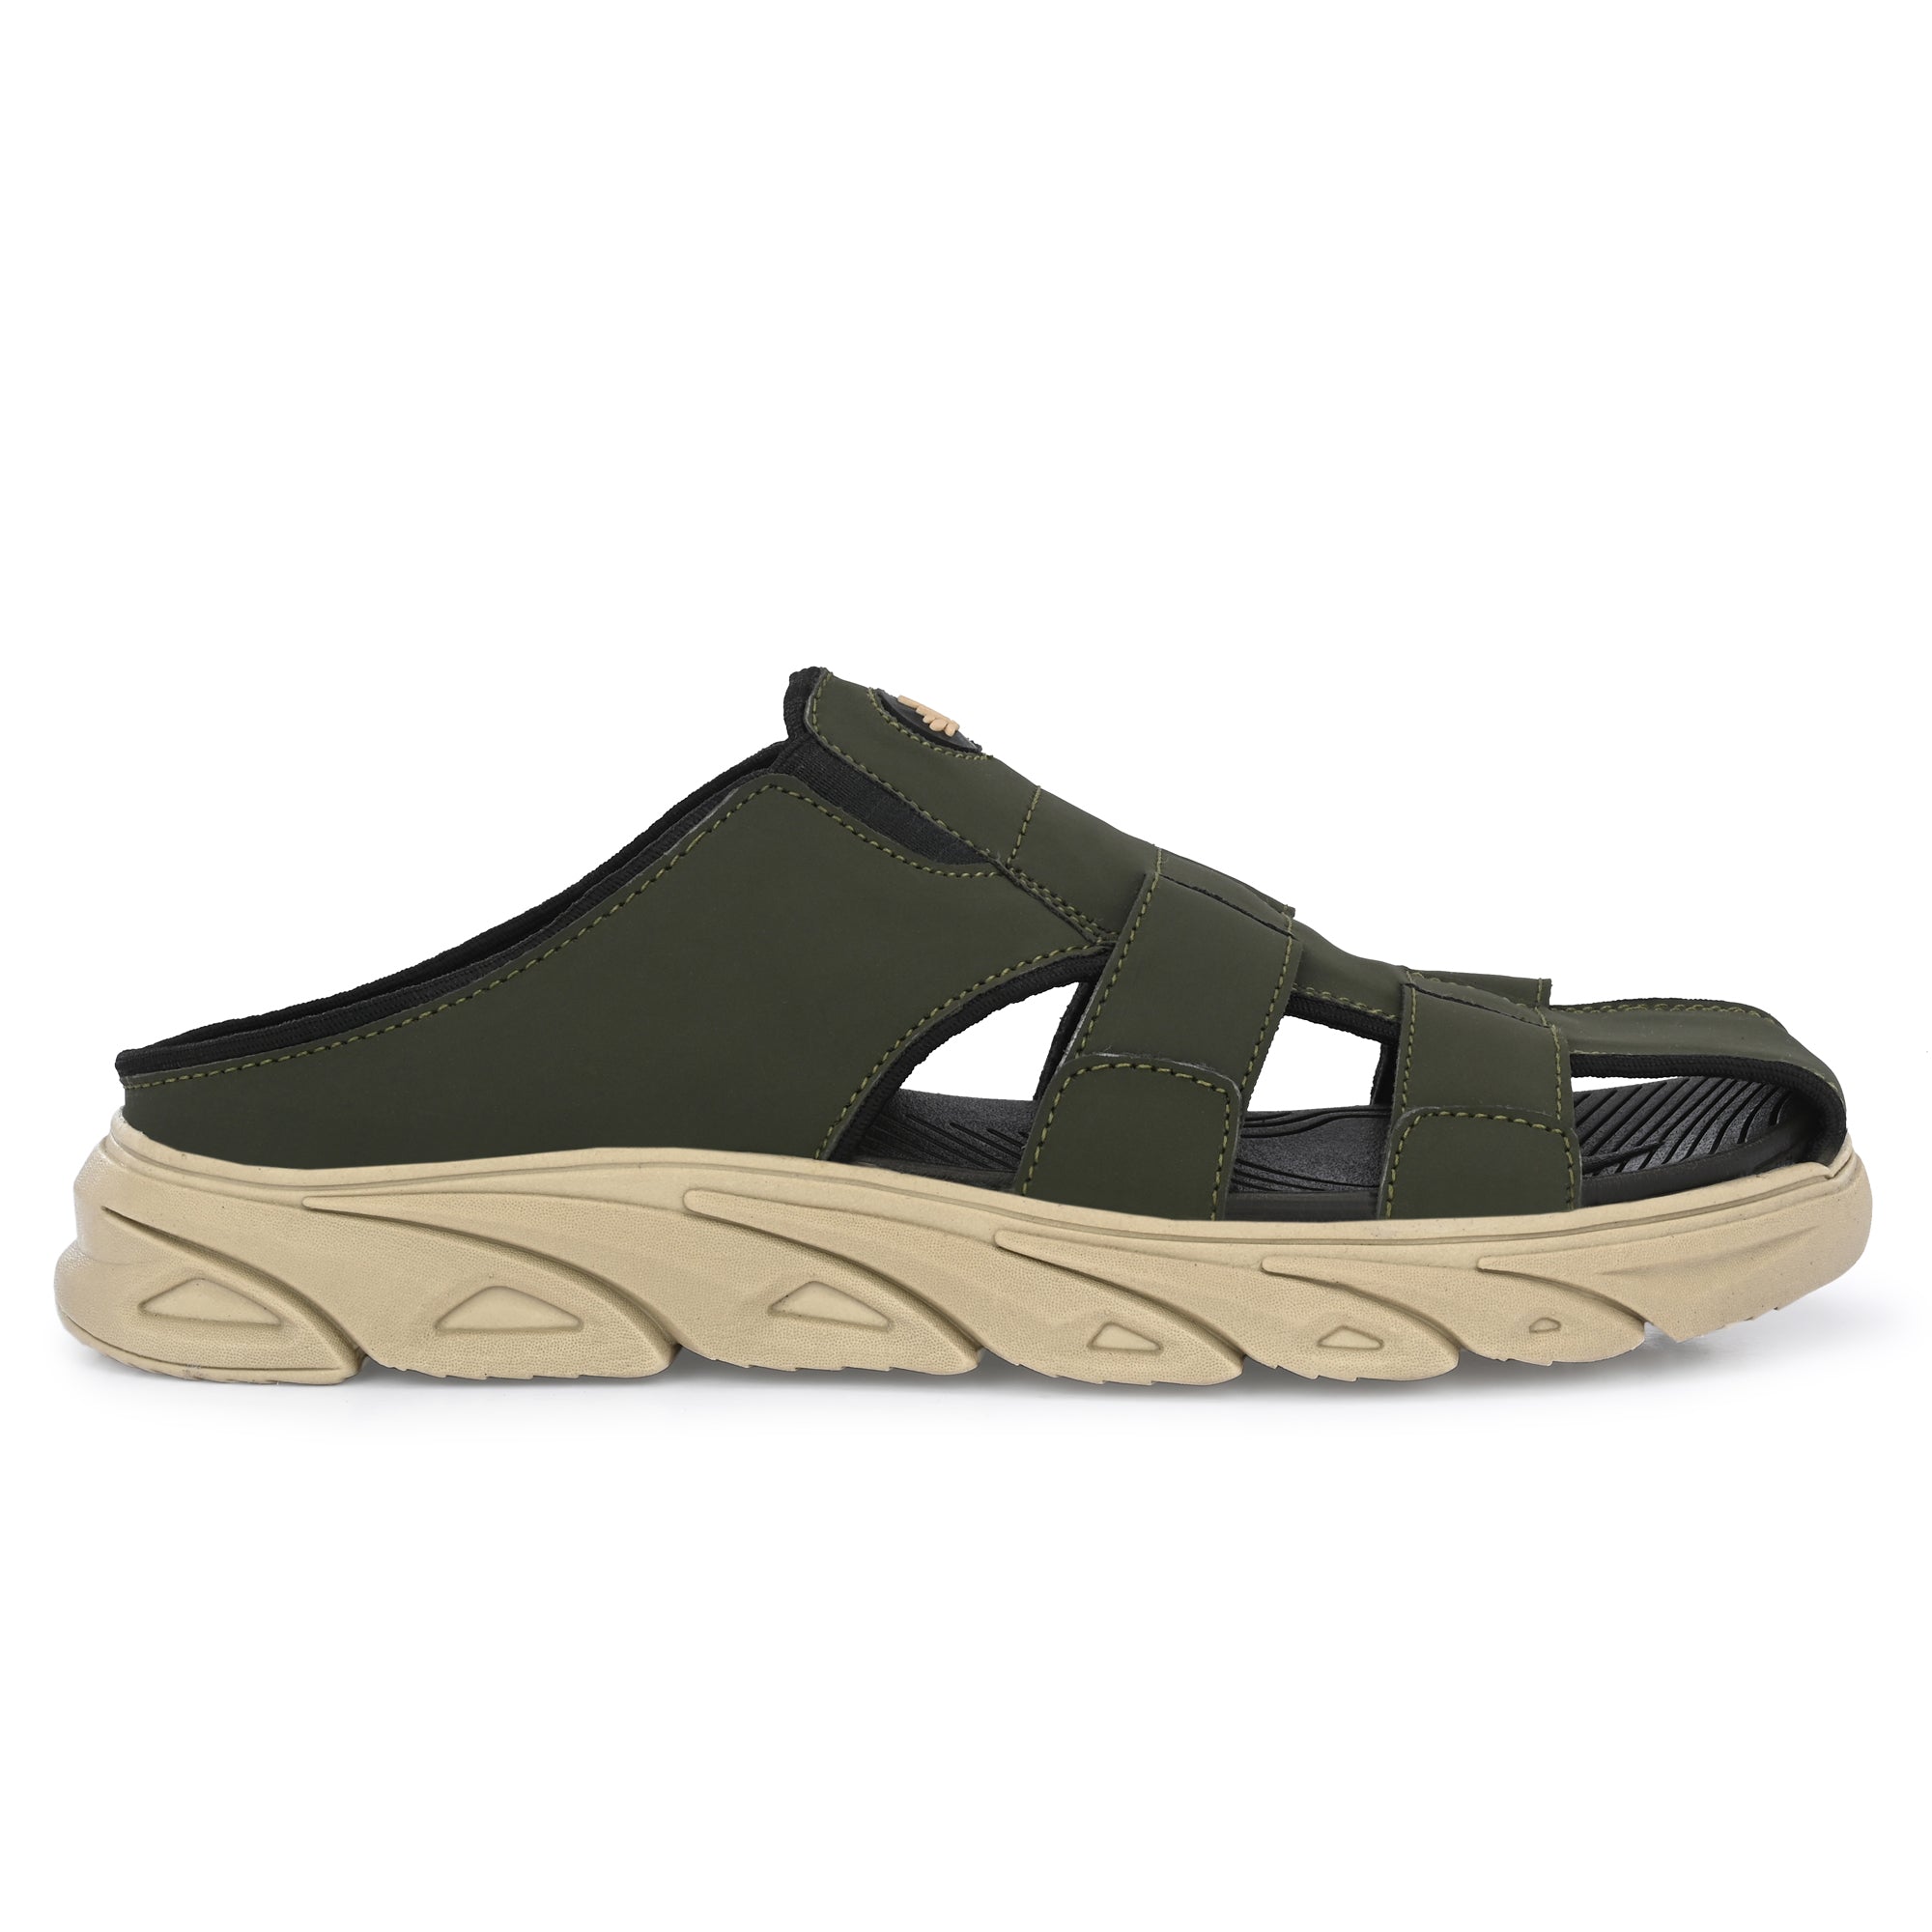 REEF® Sandals, Shoes, Boots & Apparel | Free Shipping over $65